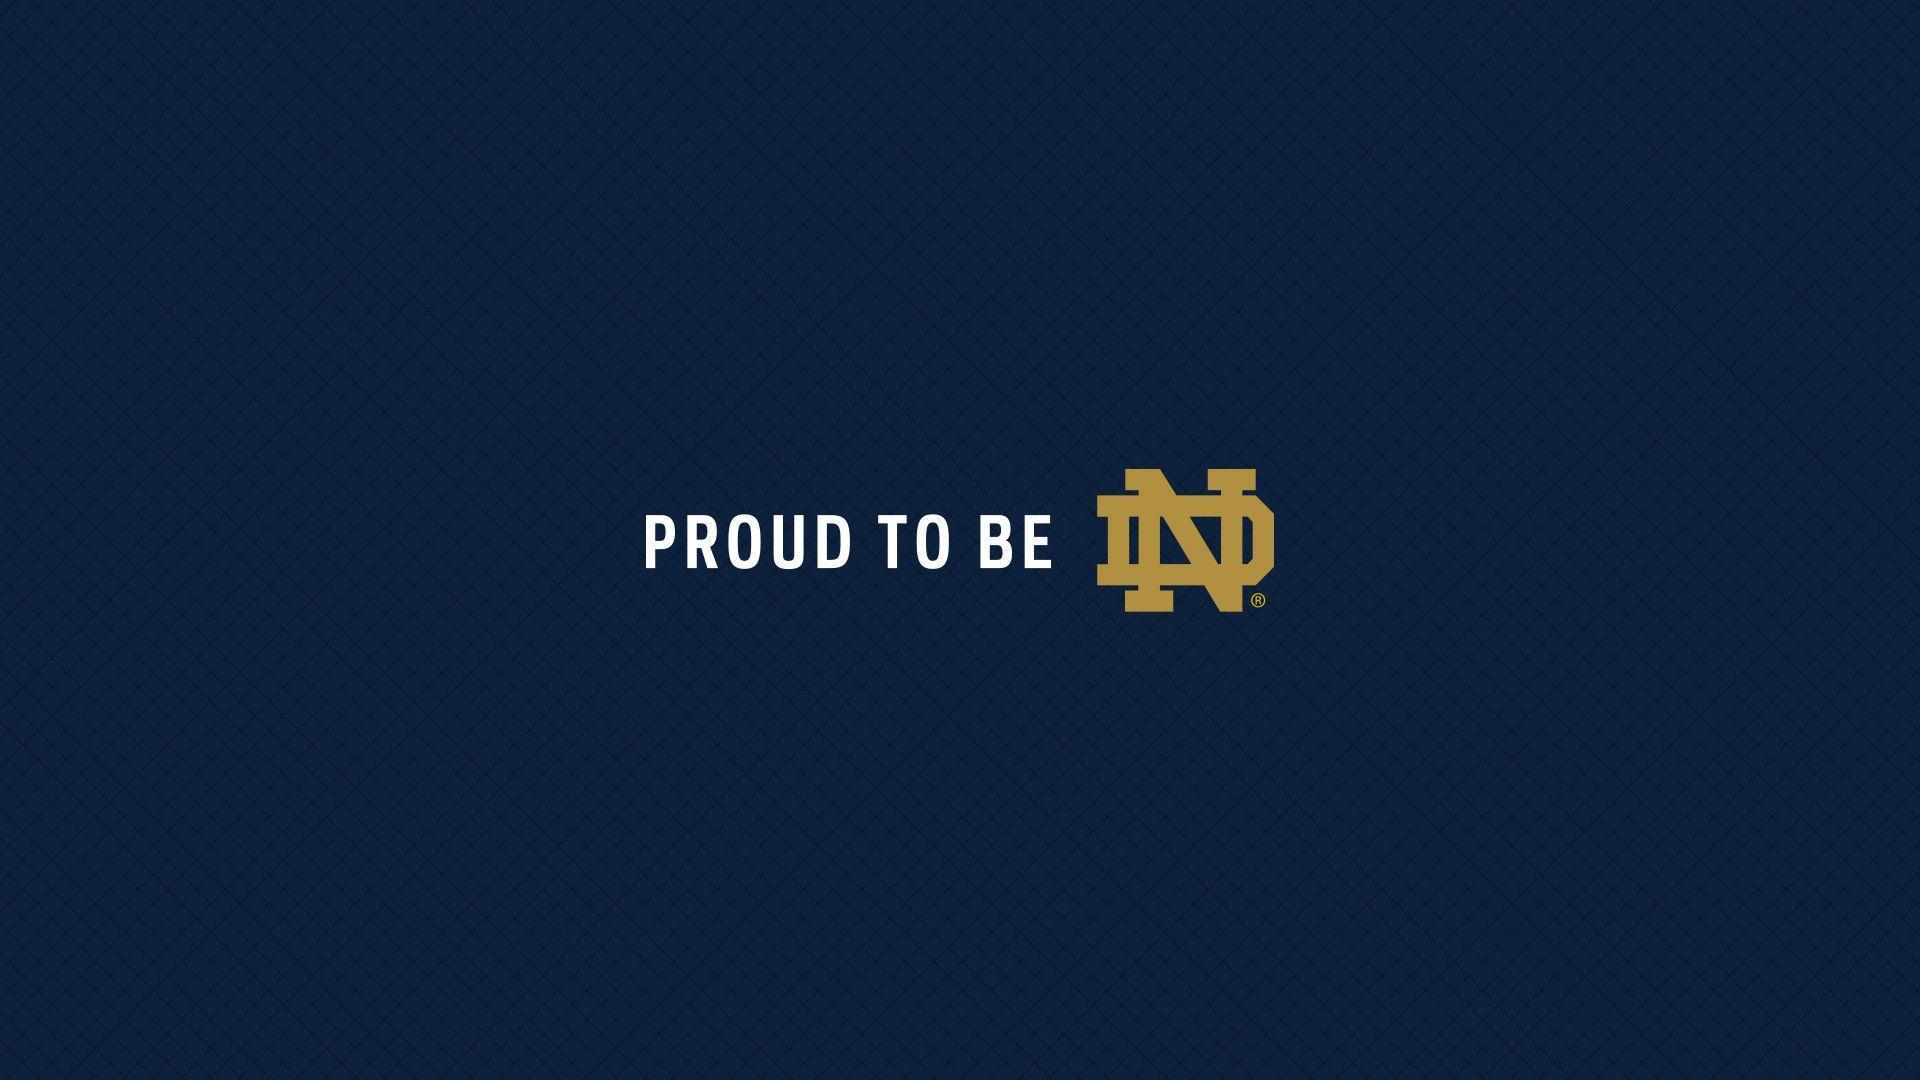 Notre Dame Border Wallpapers